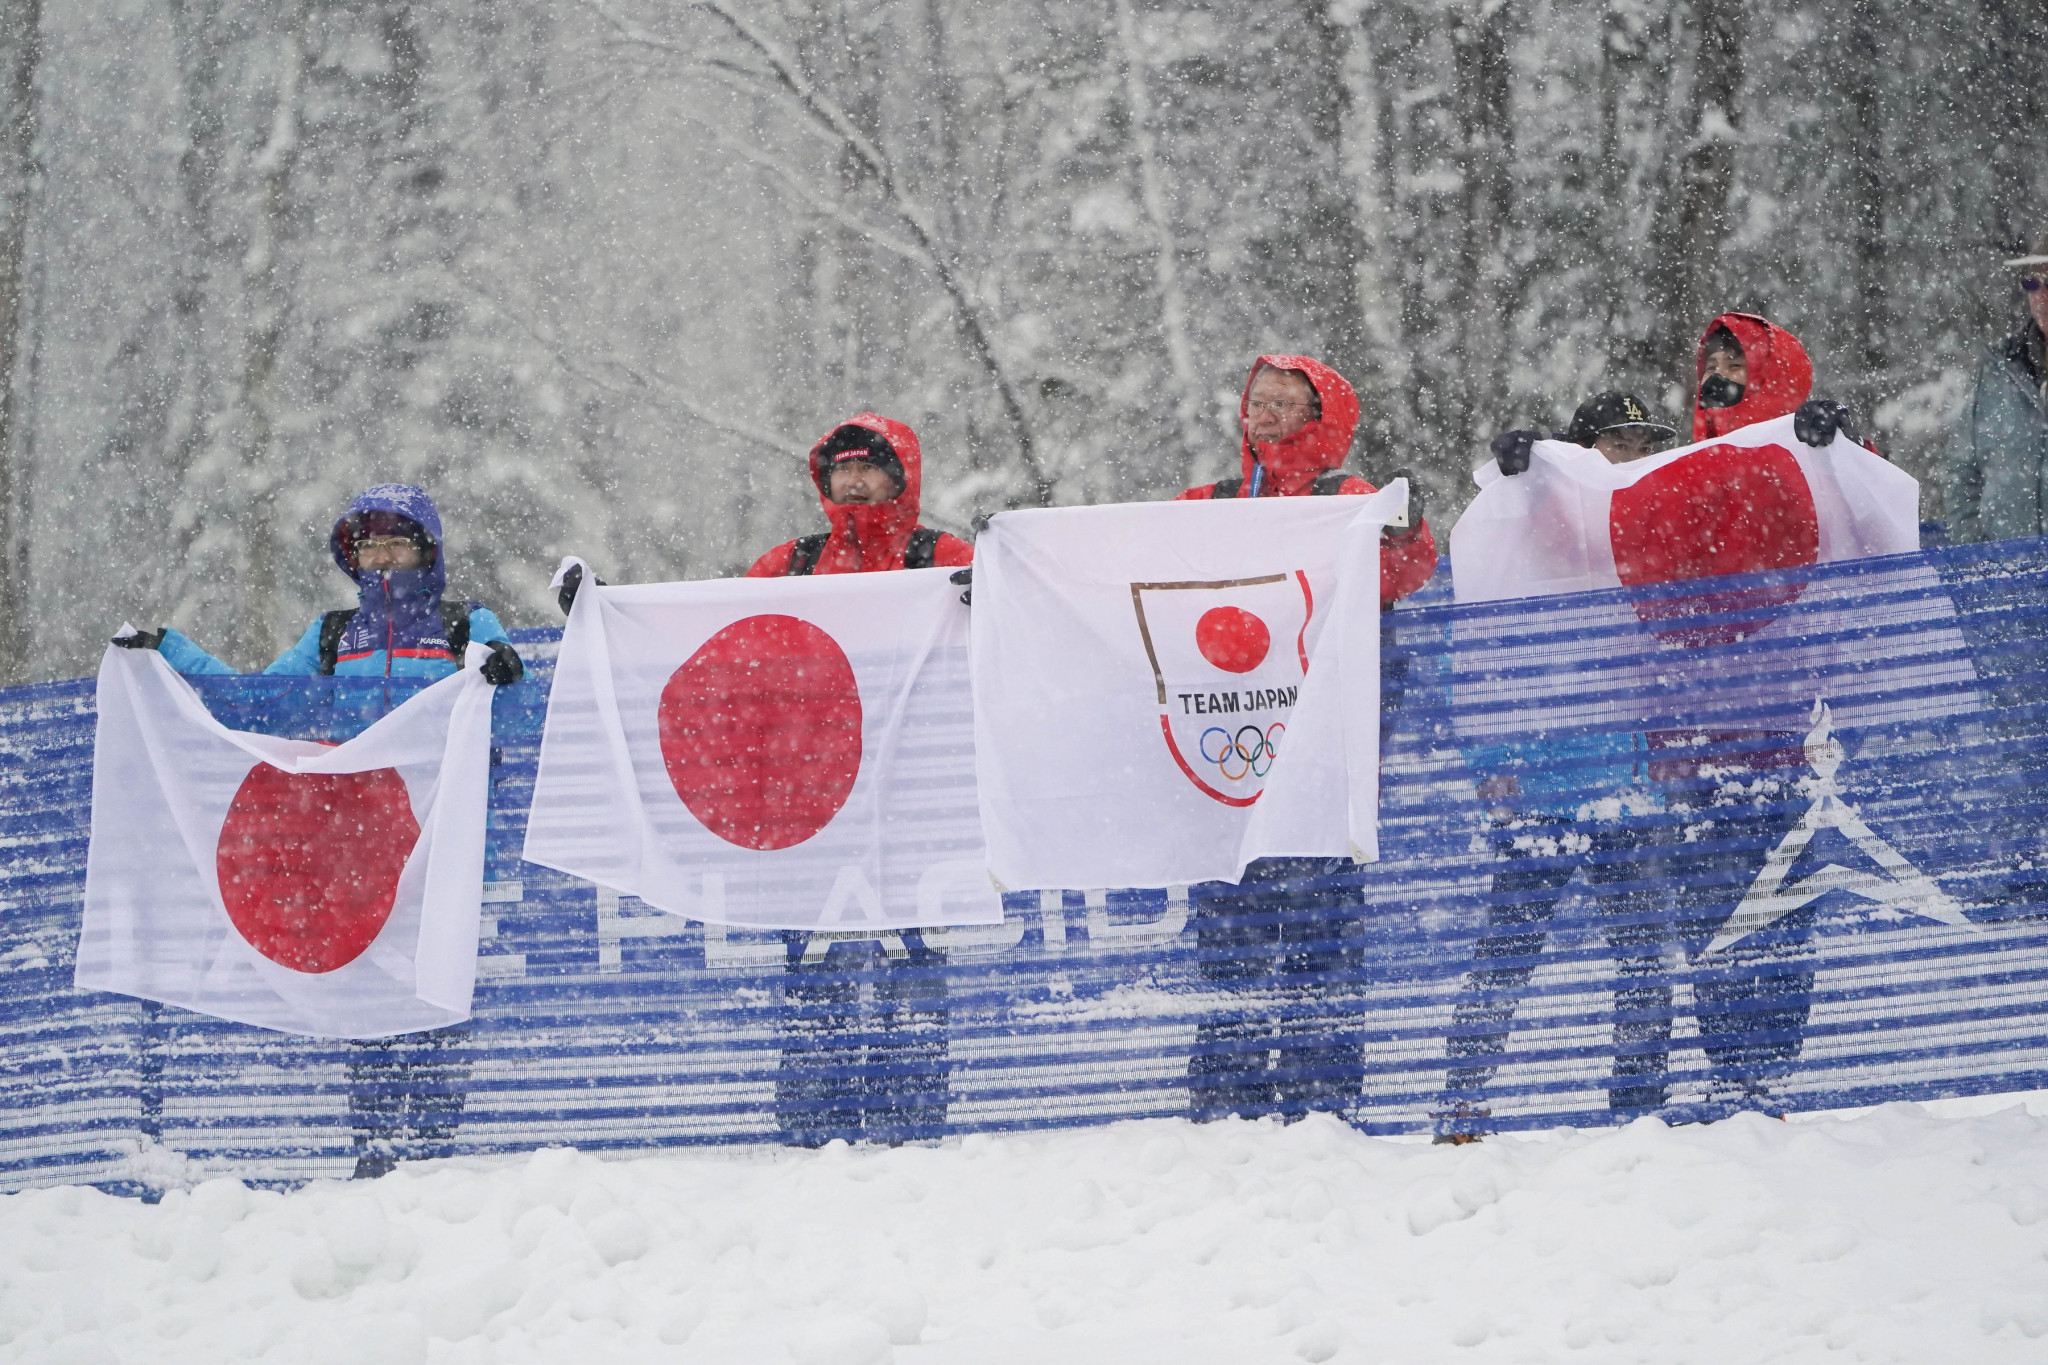 Japanese fans brave the conditions to support their cross-country skiiers at Mount Van Hoevenberg ©FISU